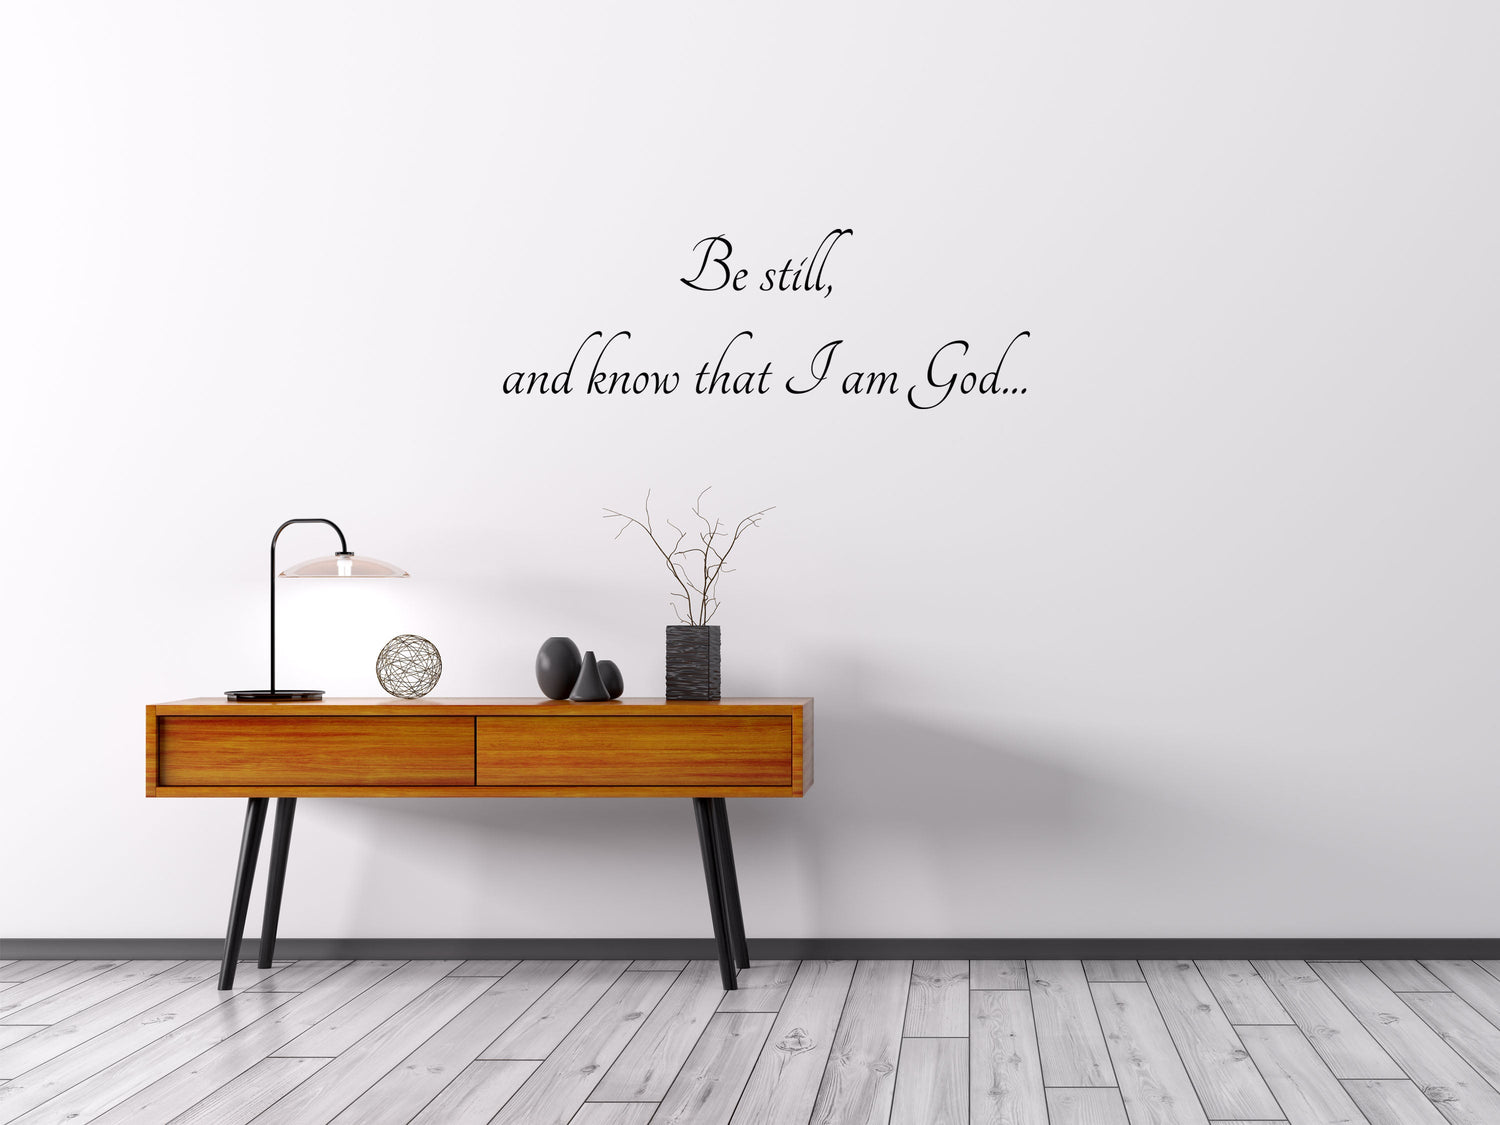 Be Still and Know that I am - God Scripture Wall Decals Vinyl Wall Decal Inspirational Wall Signs 